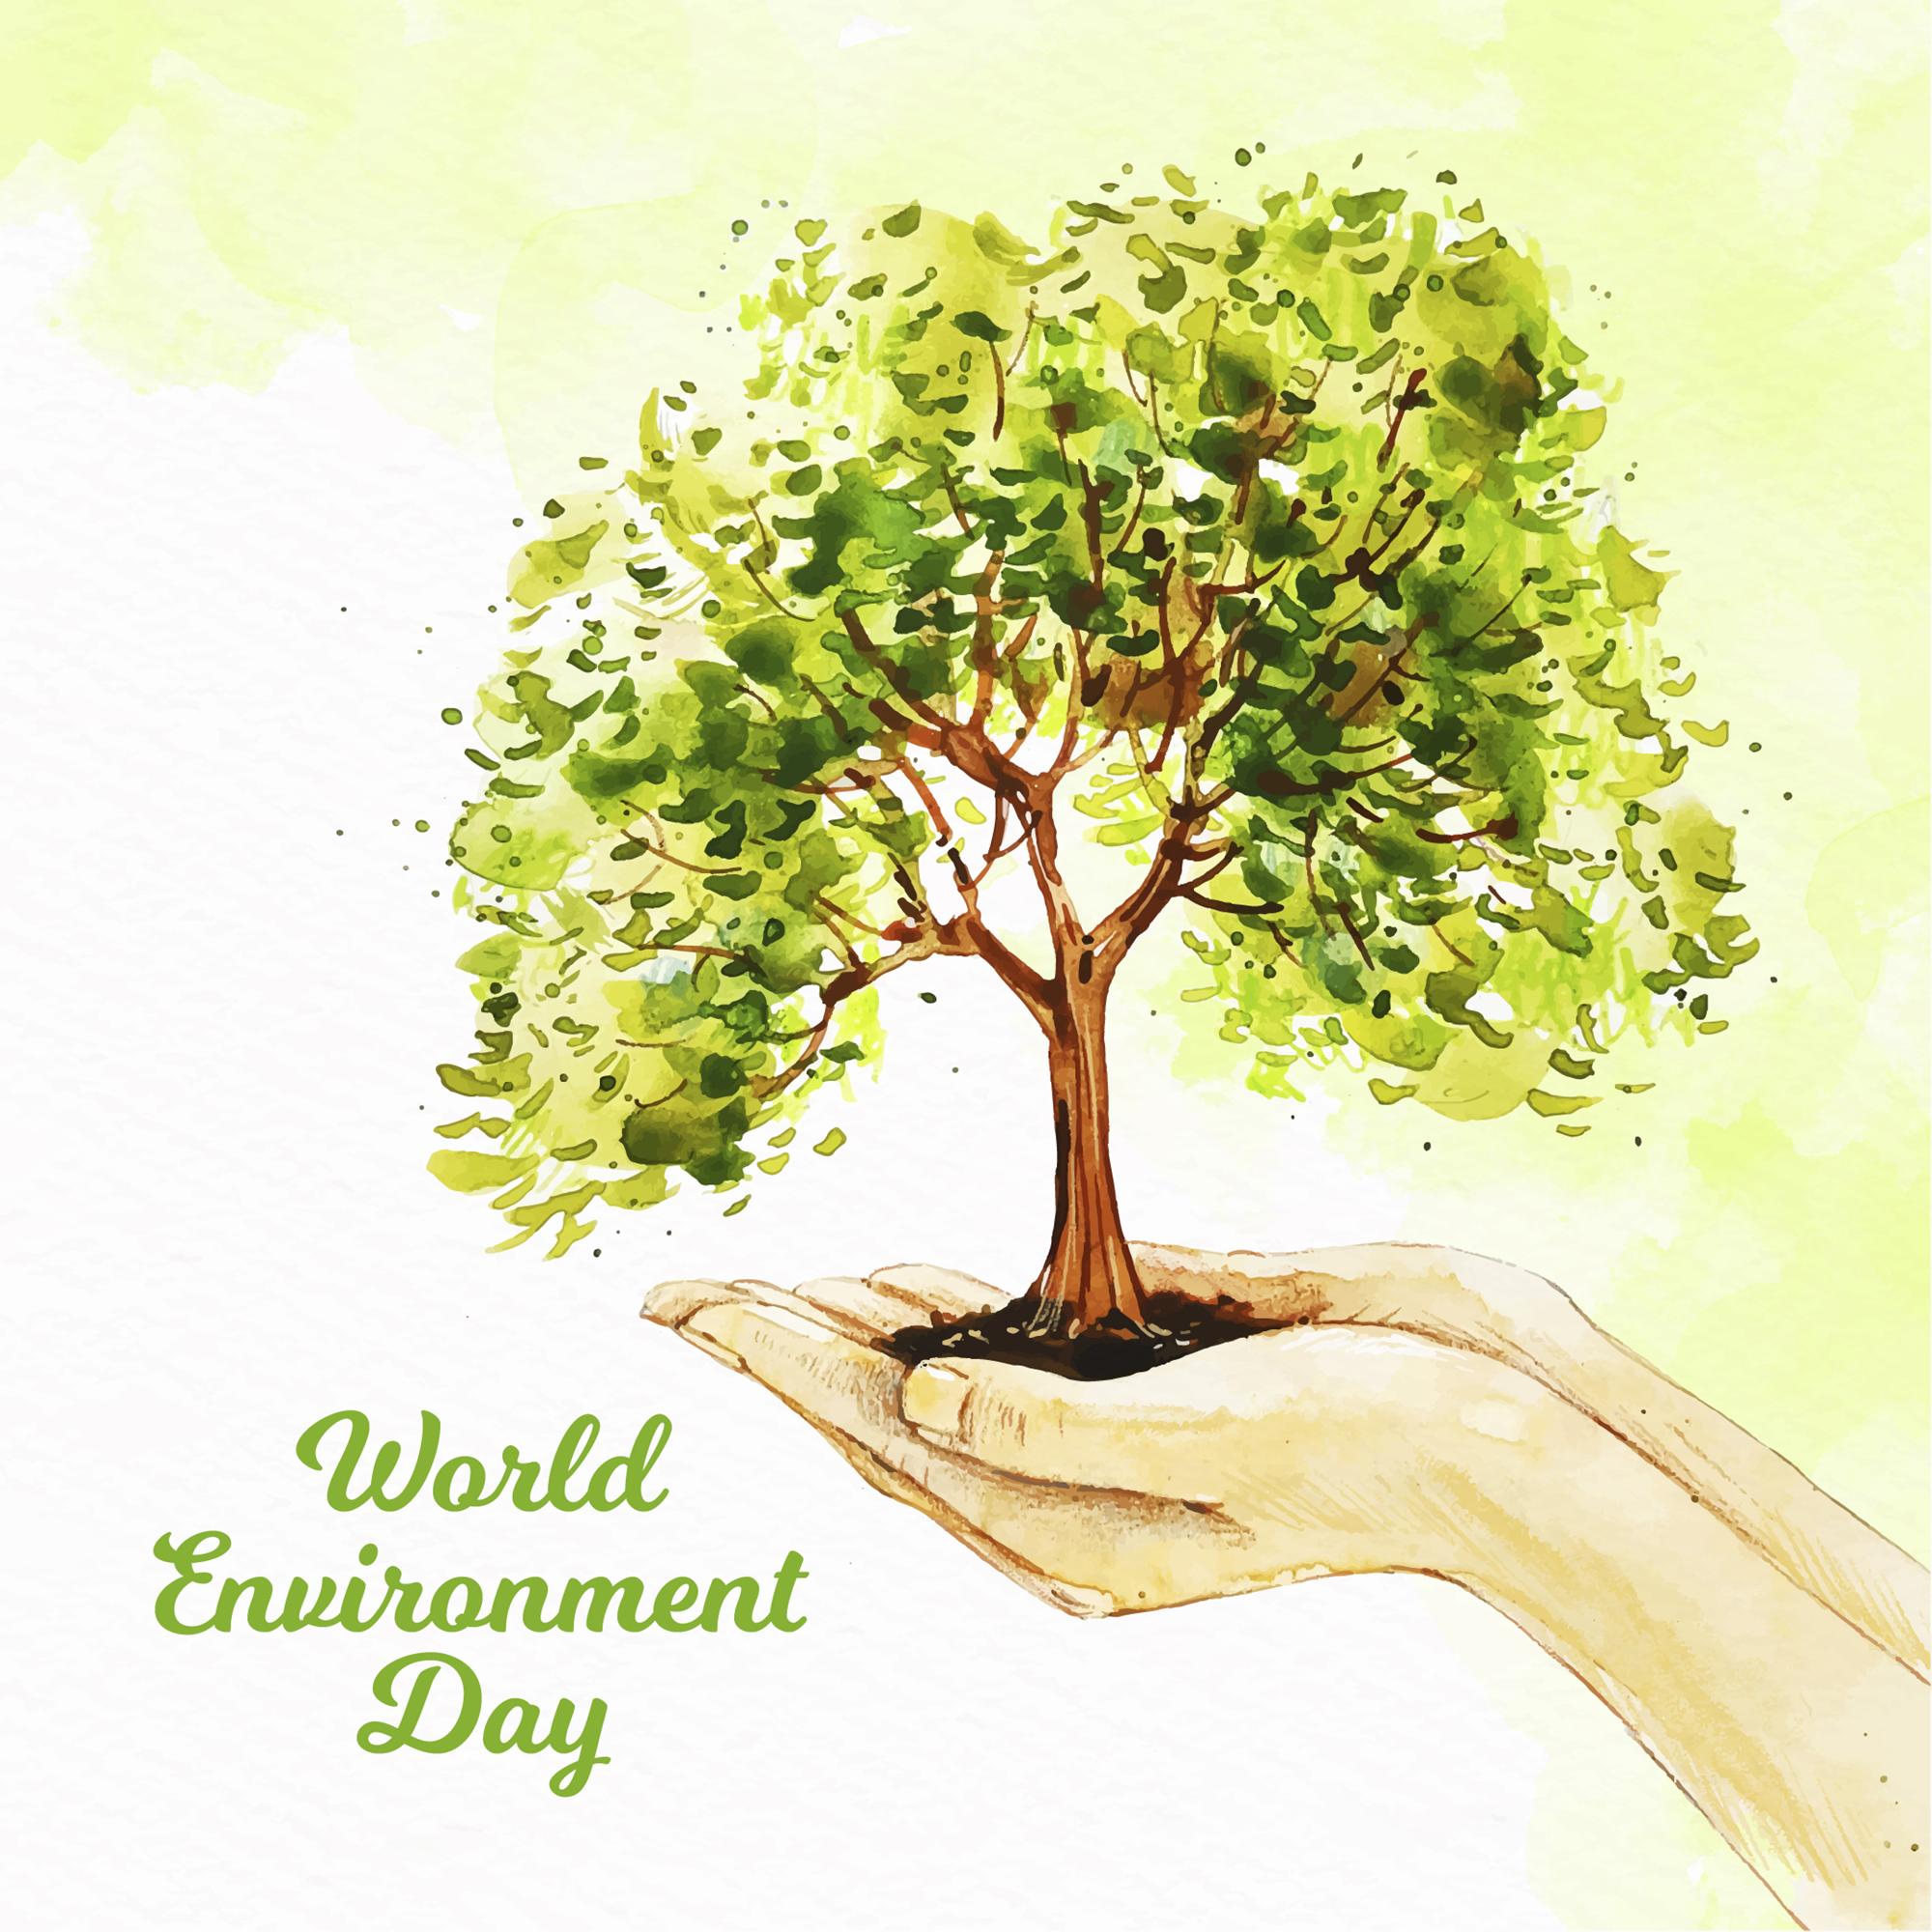 Do you think youth can make the future greener? World Environment Day